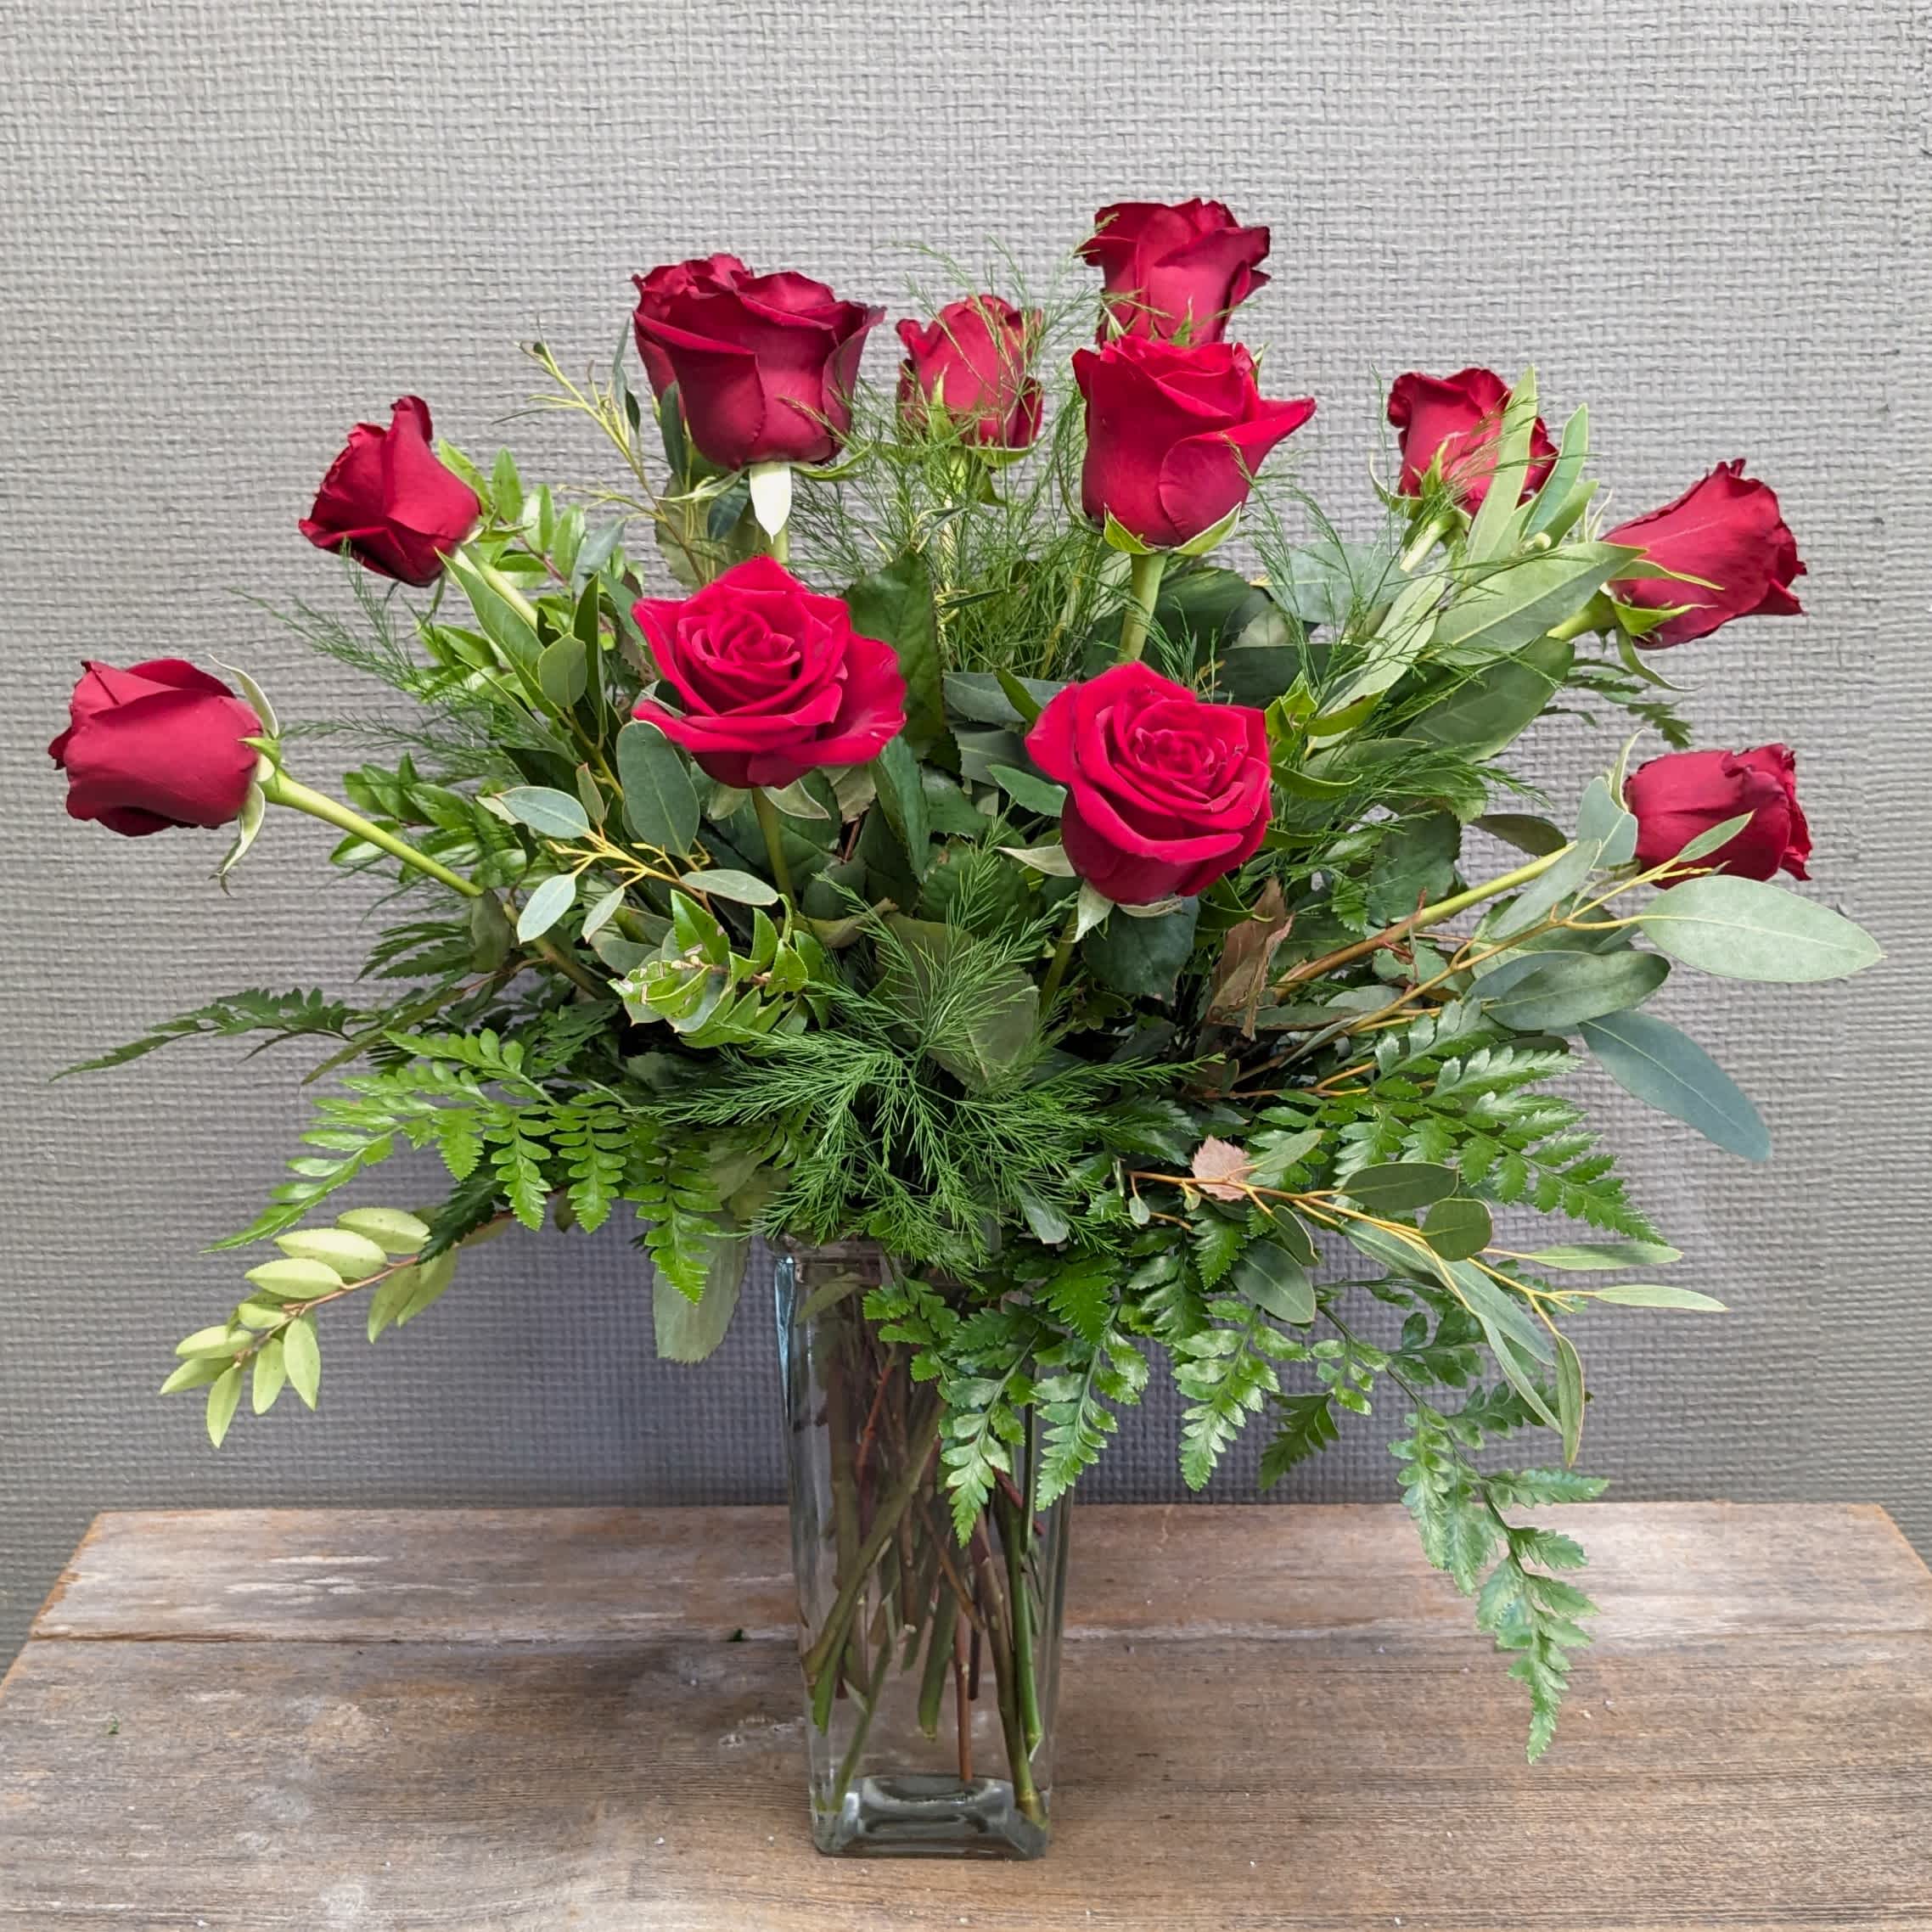 Just Amore - One dozen roses with a mix of only greenery to complement the roses, no filler. Simple and refined, this arrangement lets the natural beauty of the roses take center stage. Deluxe and Premium  upgrades will have 18 and 24 roses respectively. Please let us know in special instructions if you have rose color request other than red; red will be the default.